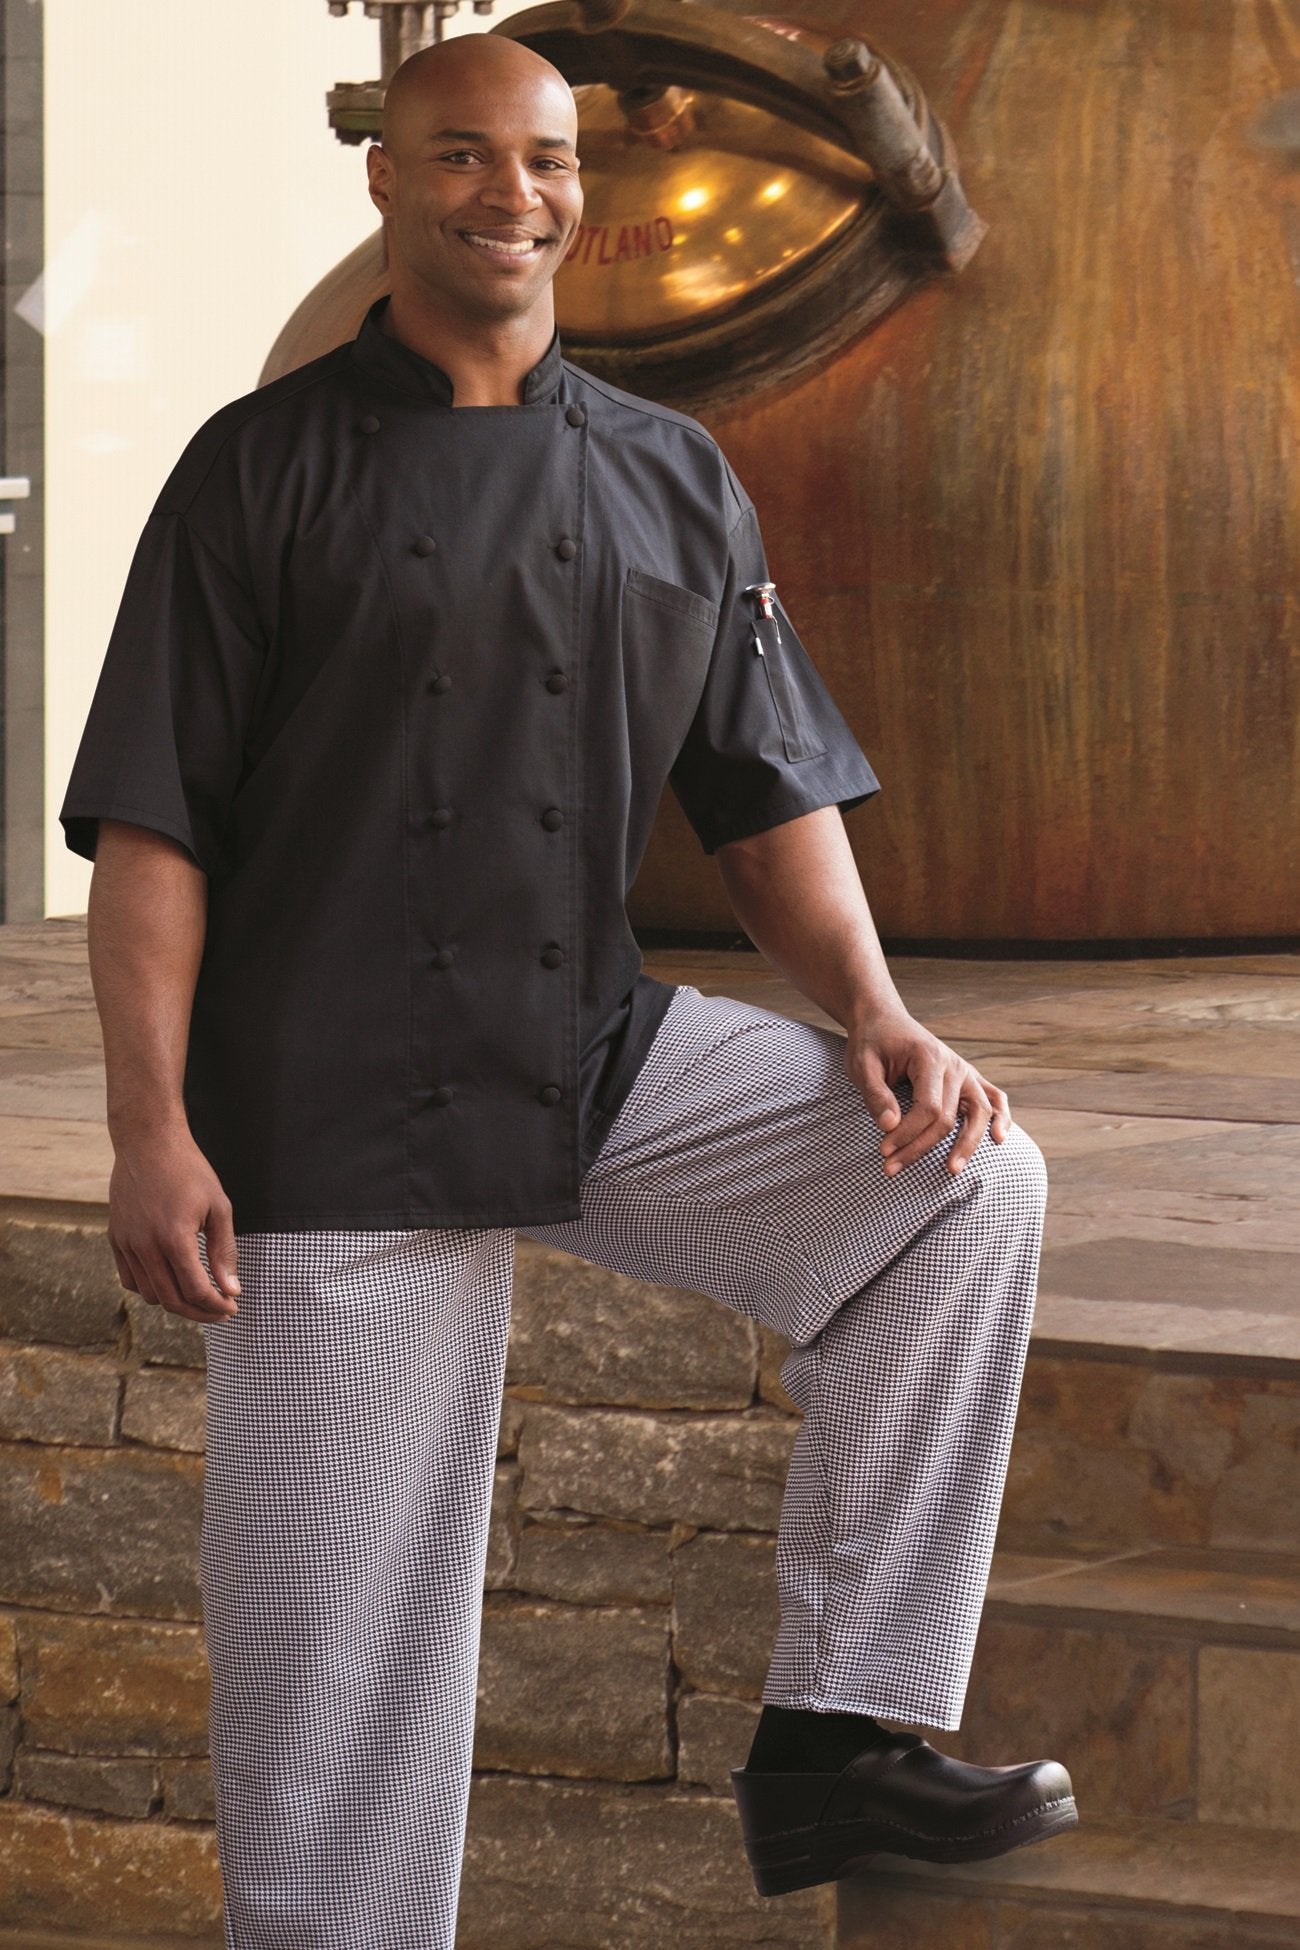 Traditional Chef Pant - Caterwear.com